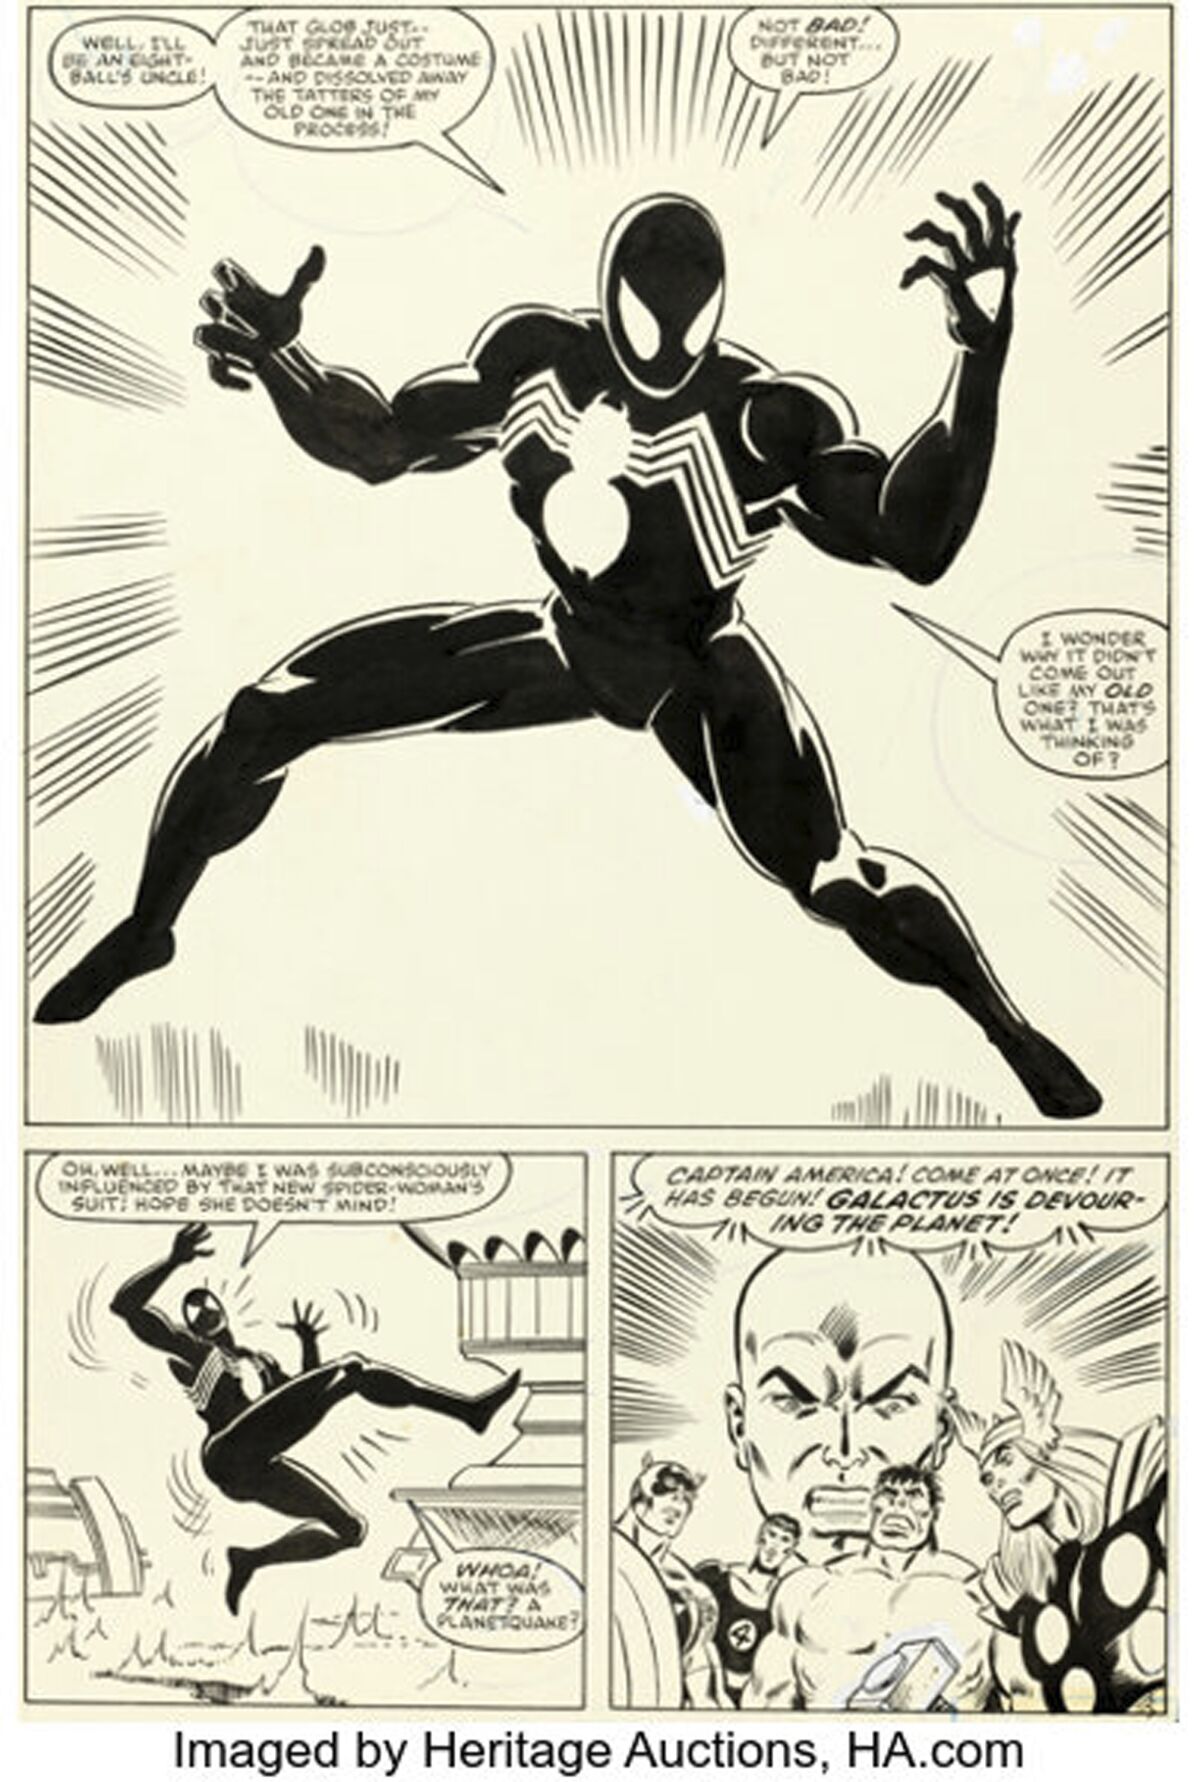 This image provided by Heritage Auctions shows Page 25 from the 1984 Marvel comic Secret Wars No. 8, which tells the origin story of Spider-Man's now-iconic black costume. (Heritage Auctions via AP)